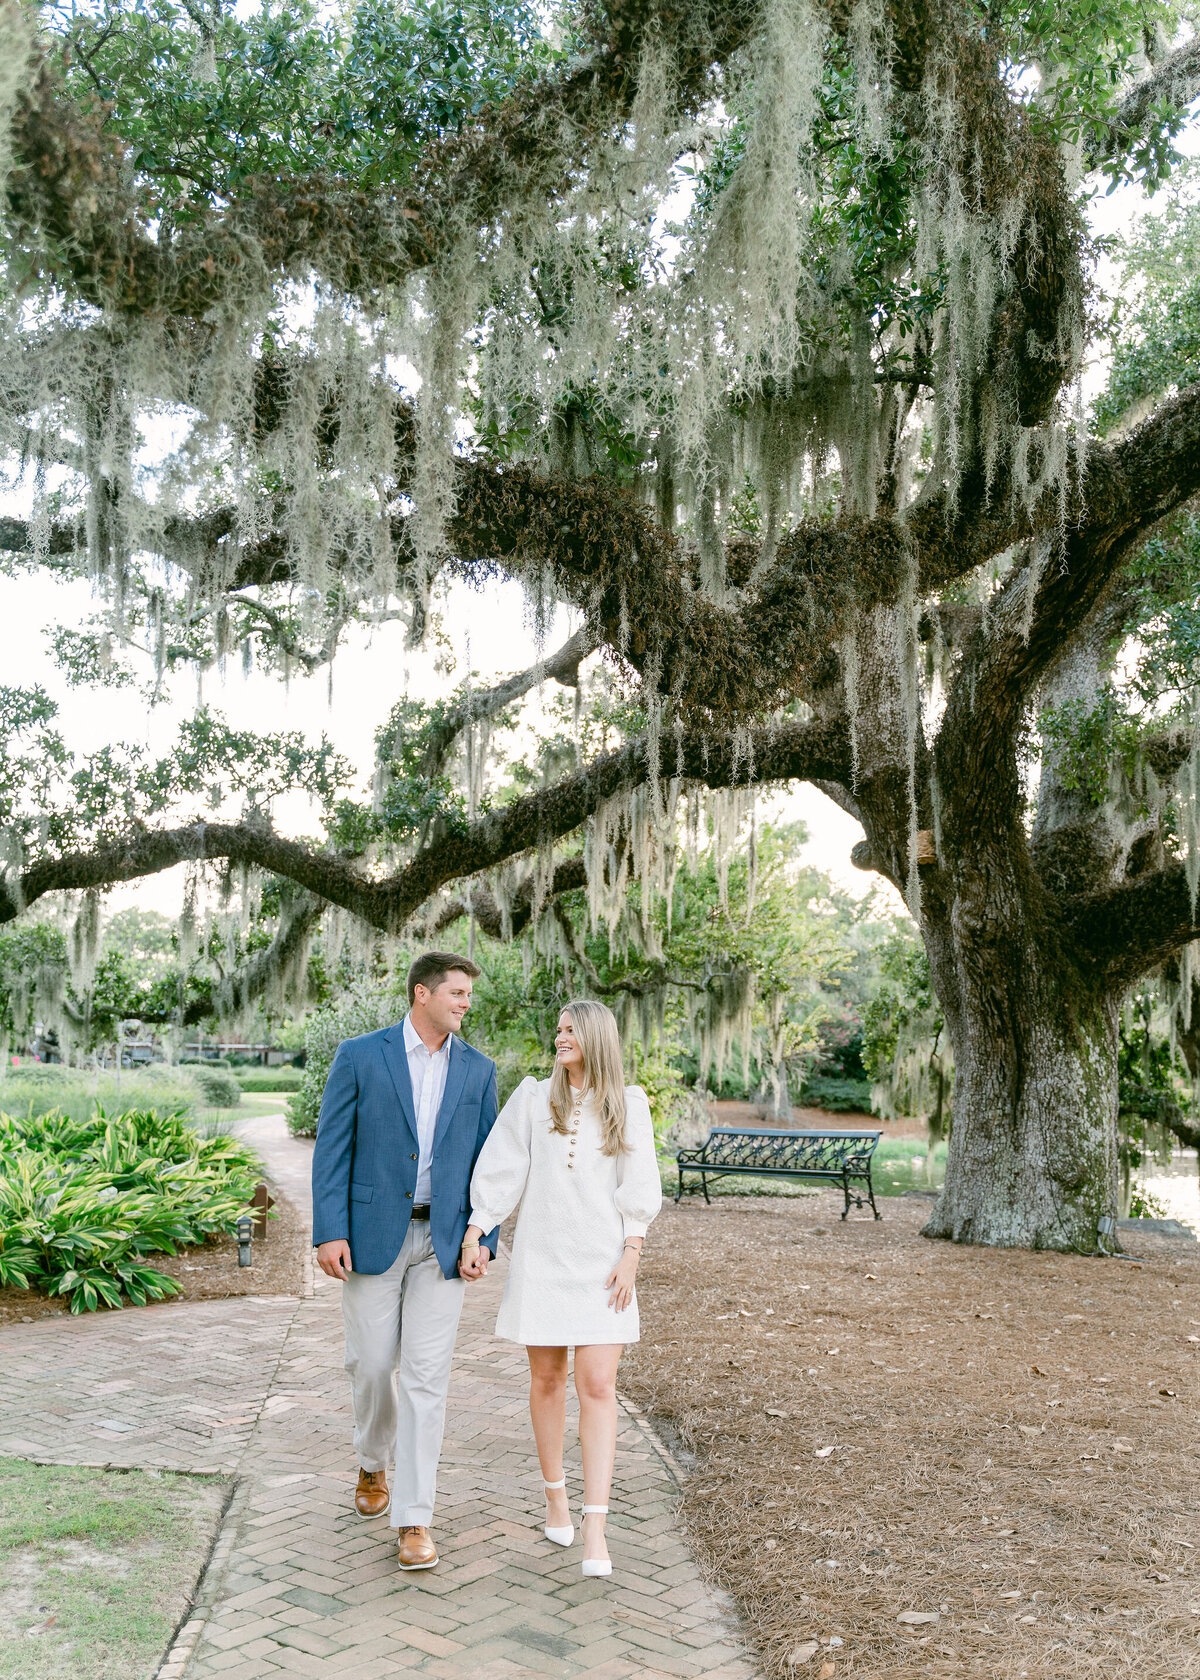 couple walking by a tree with Spanish moss